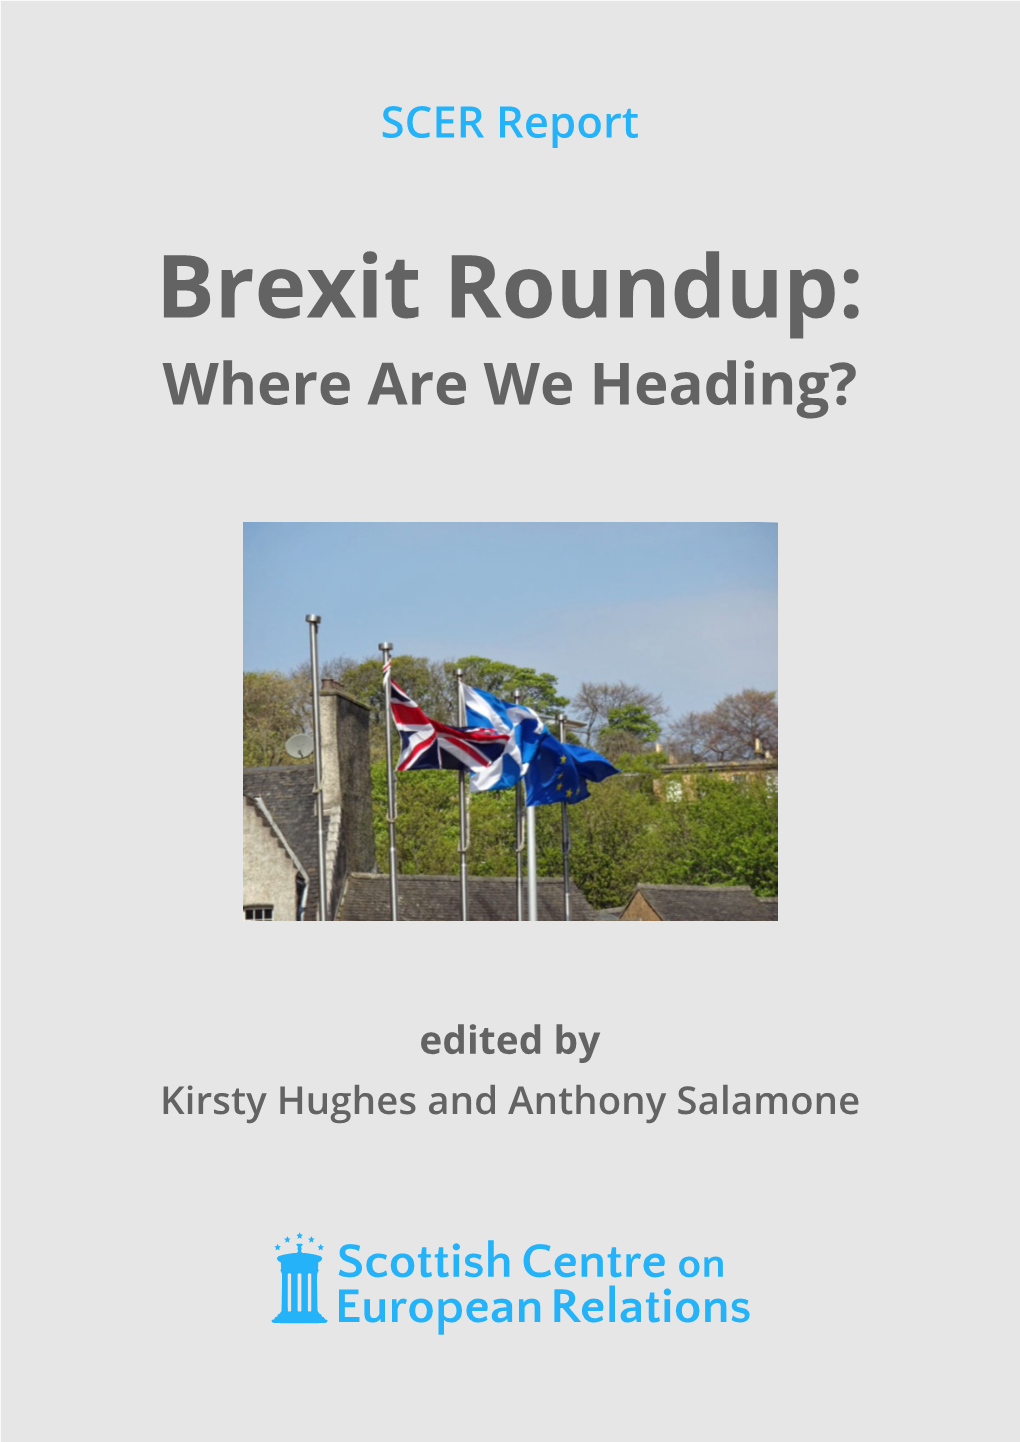 Brexit Roundup: Where Are We Heading?